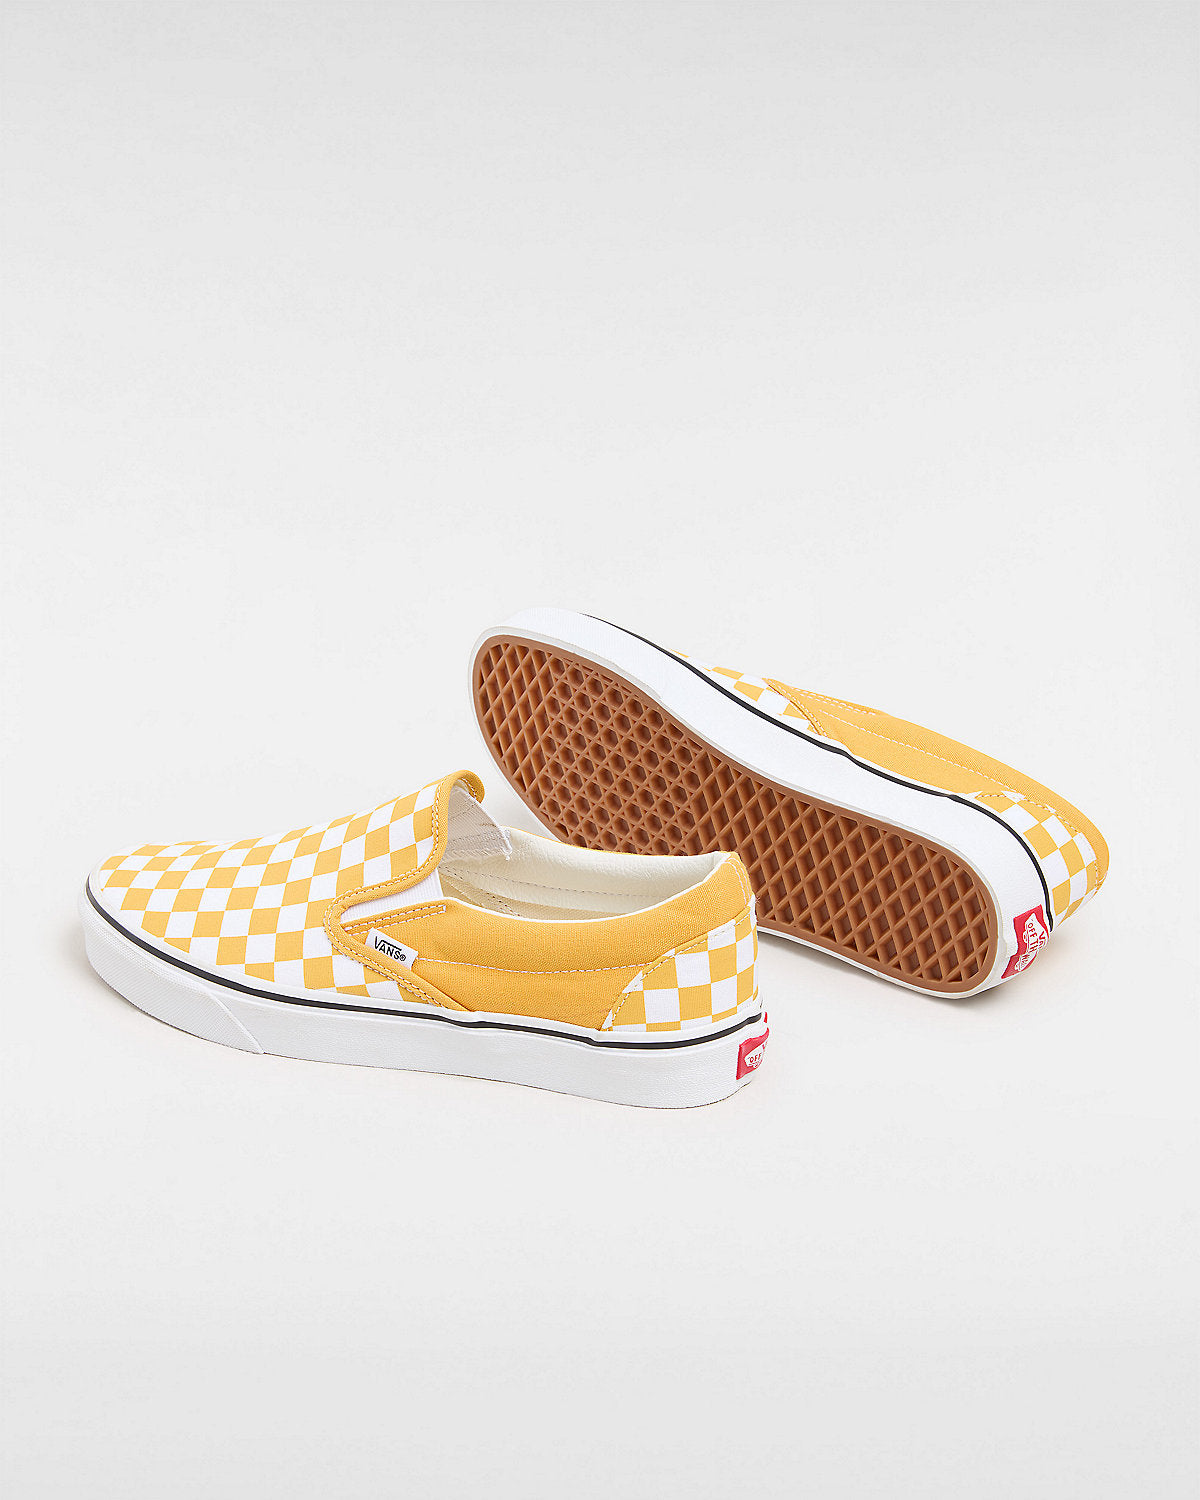 VANS Unisex Classic Slip-On Color Theory Checkerboard Trainers - Golden Glow